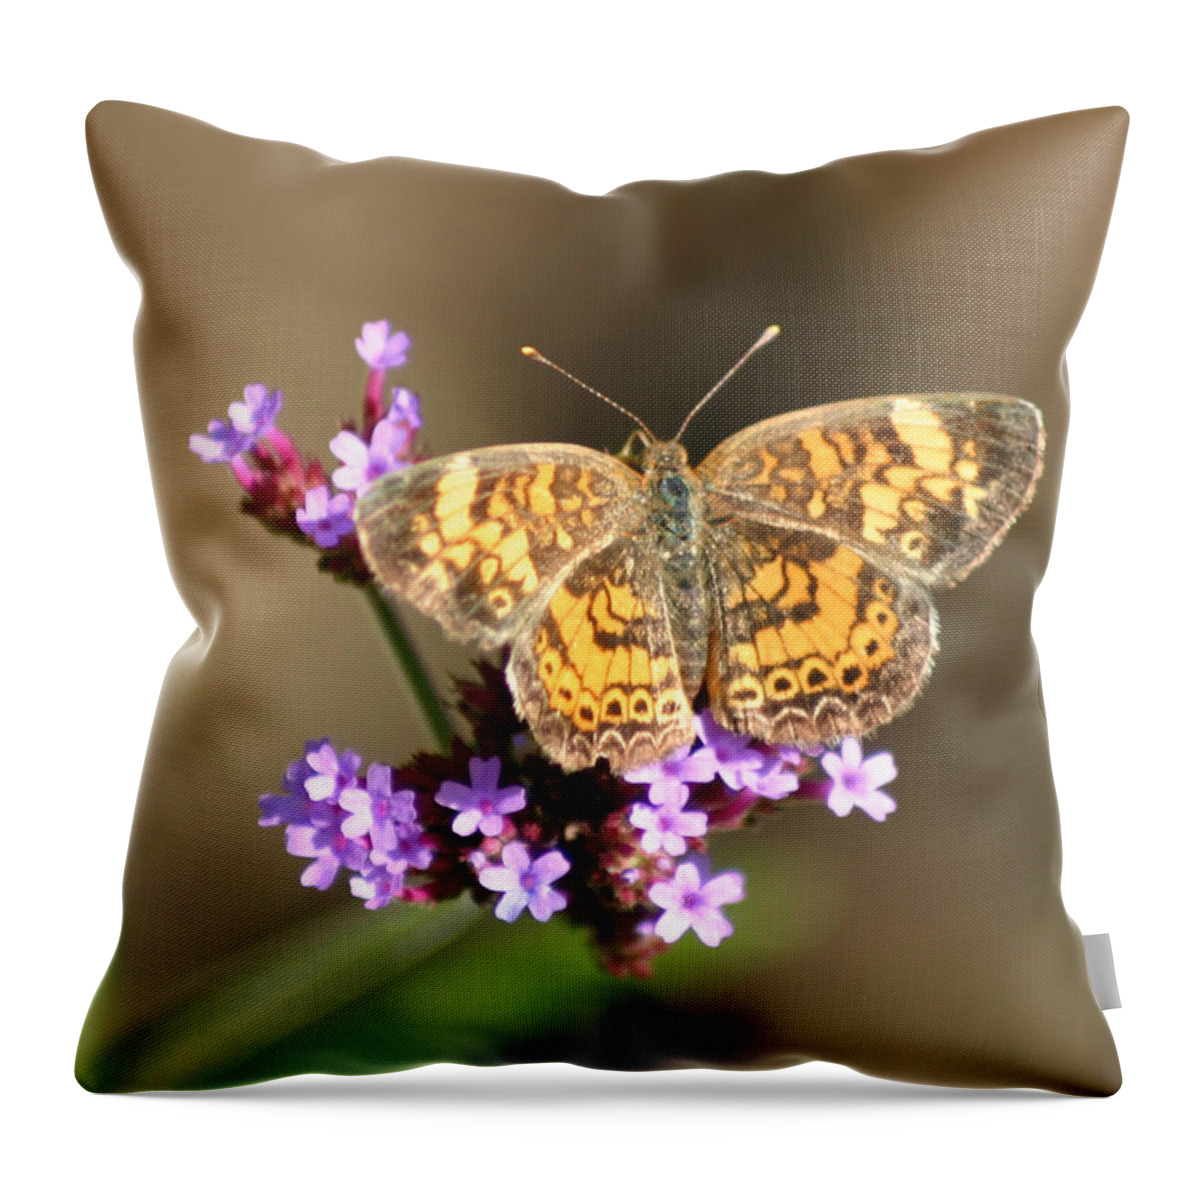 Butterfly Throw Pillow featuring the photograph Butterfly on Verbena by Robert E Alter Reflections of Infinity